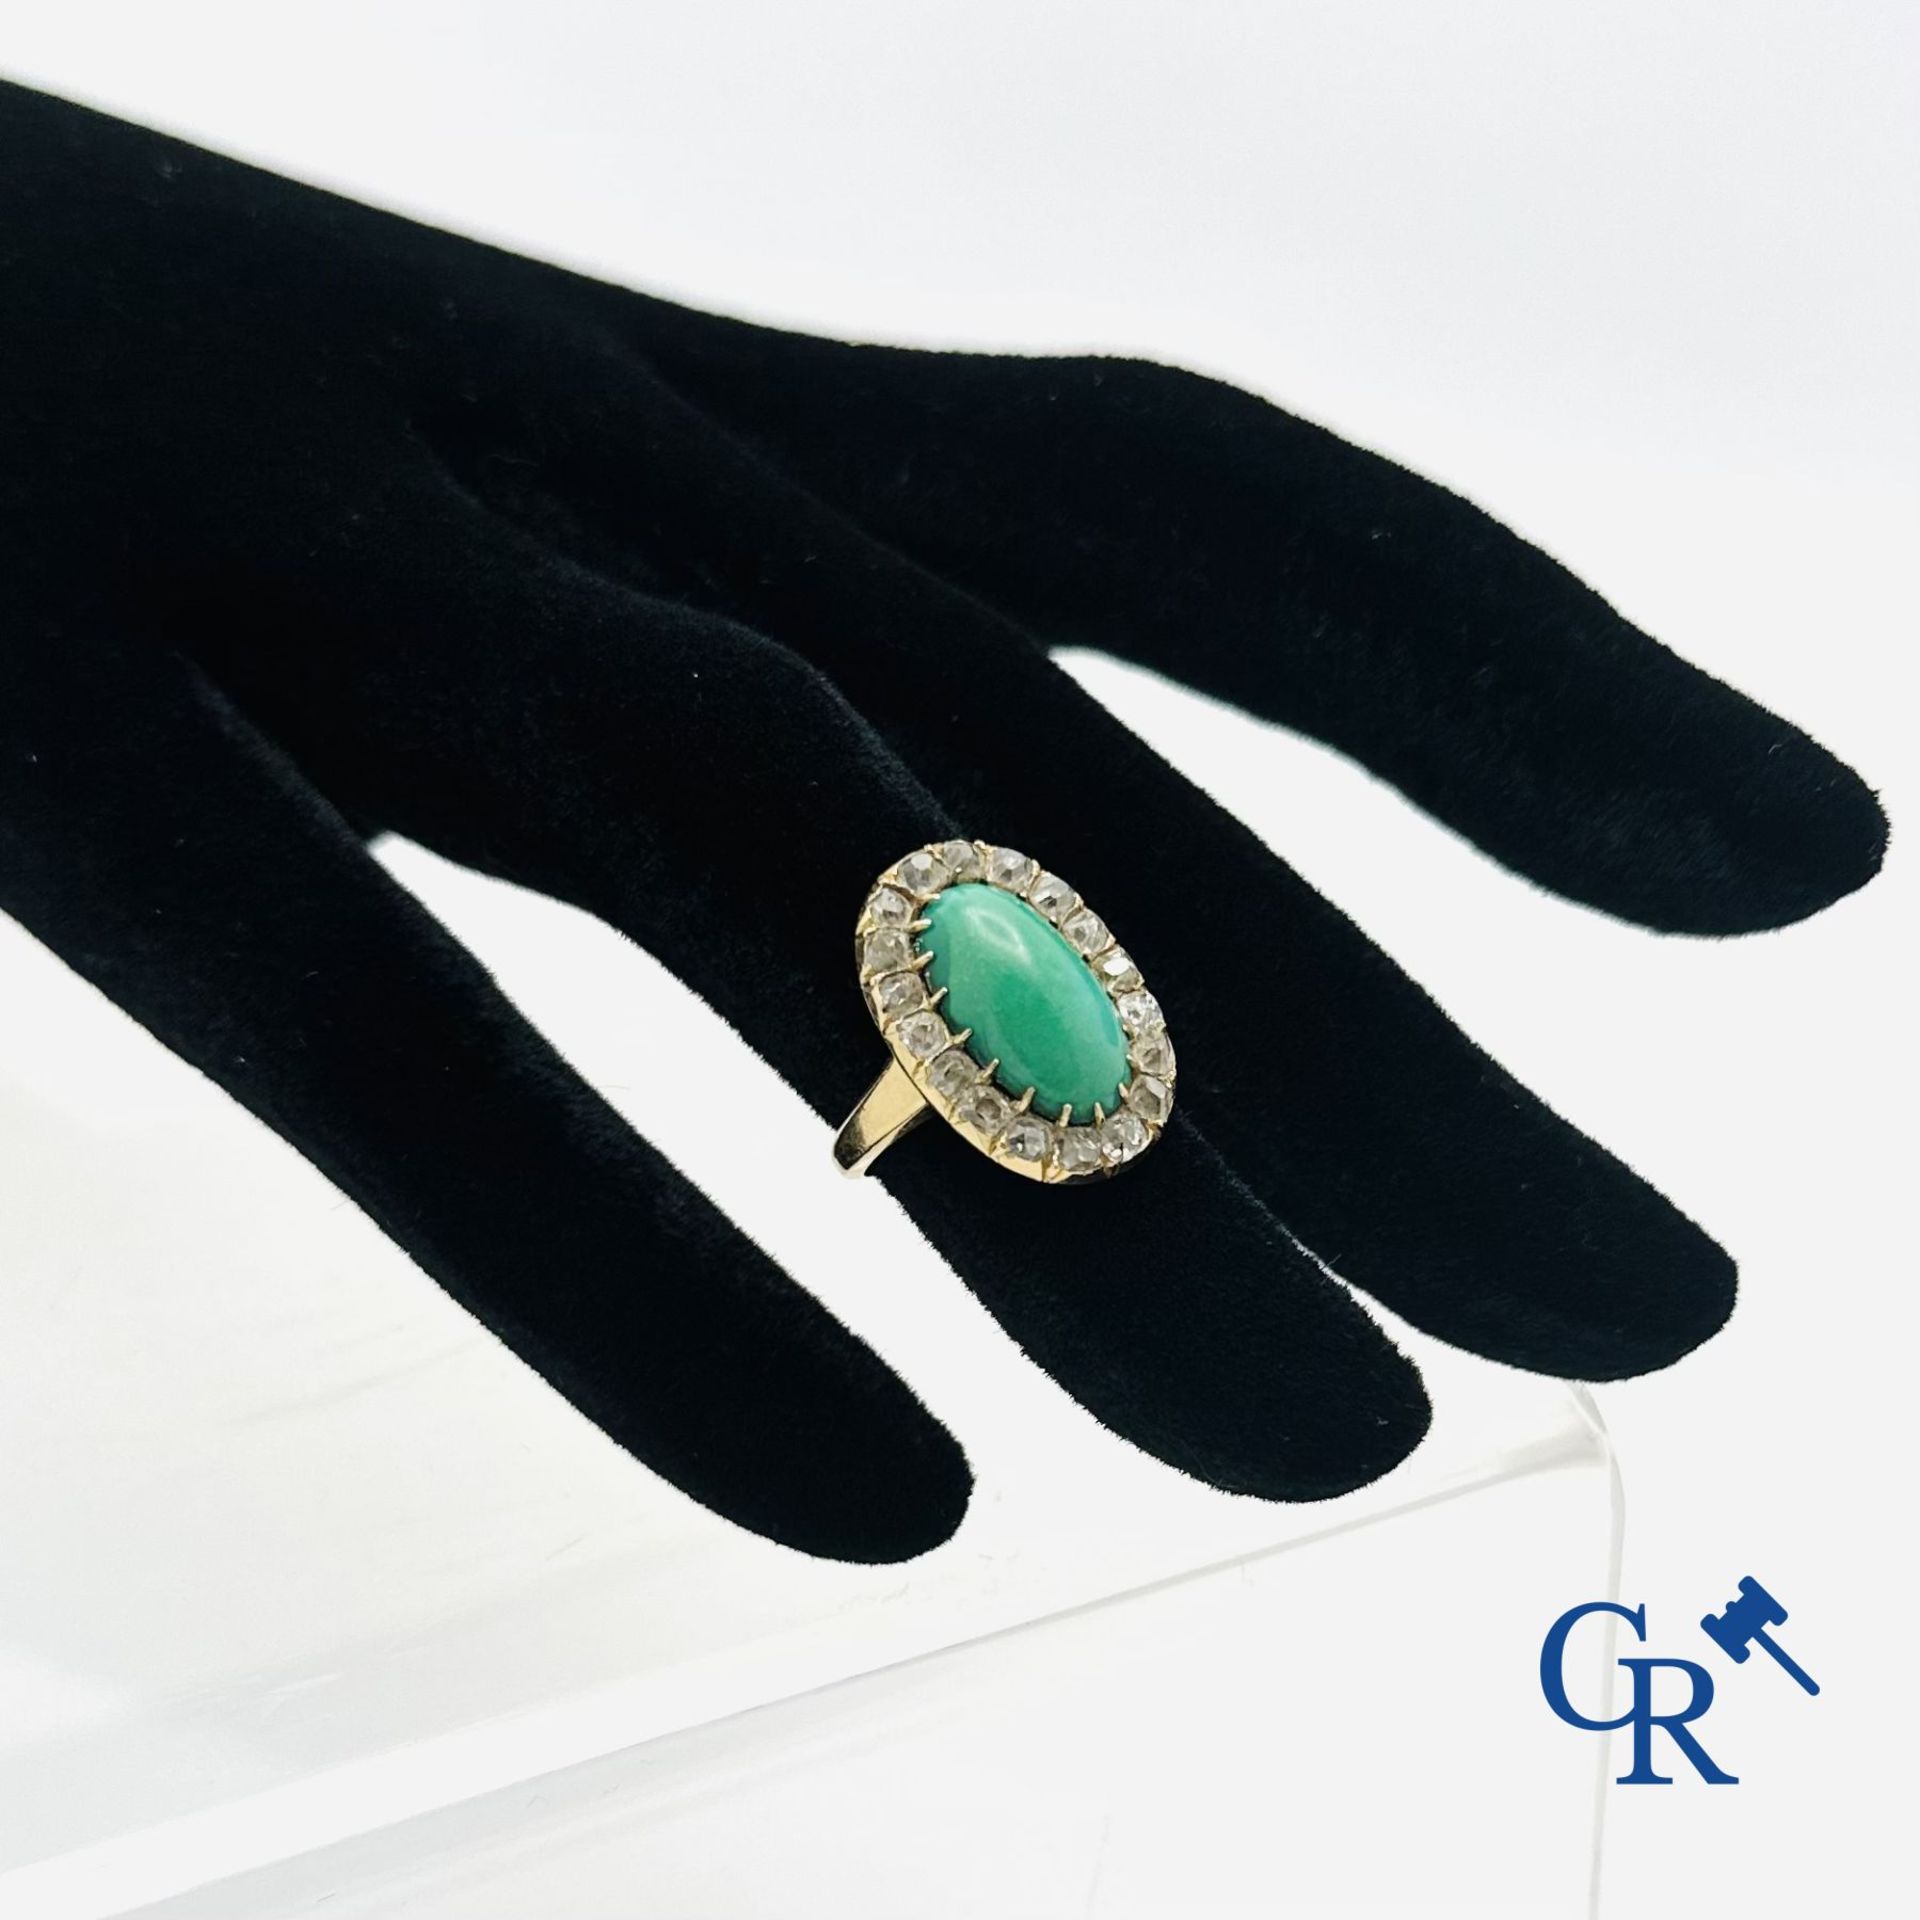 Jewellery: Ring in gold 18K set with malachite and 18 diamonds.